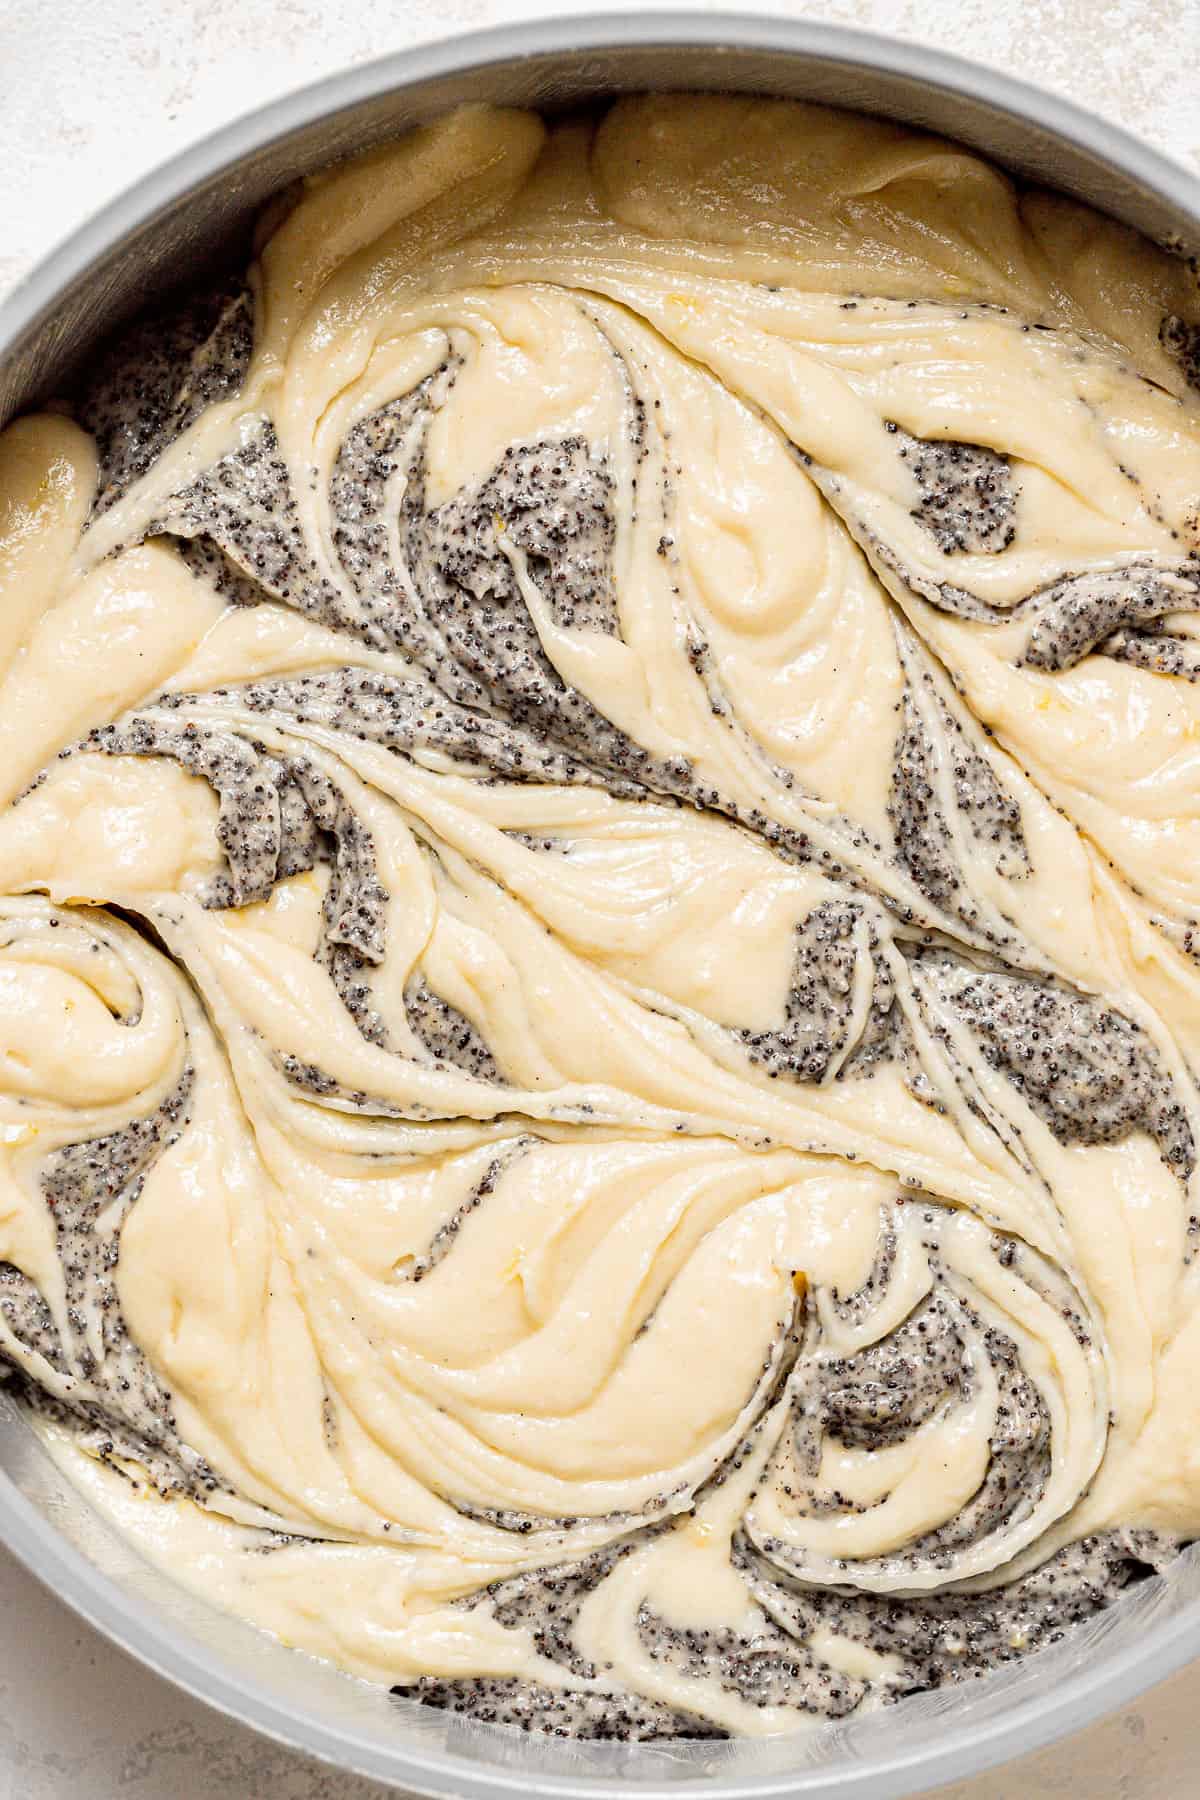 cake batter and poppy seeds swirled in cake pan.